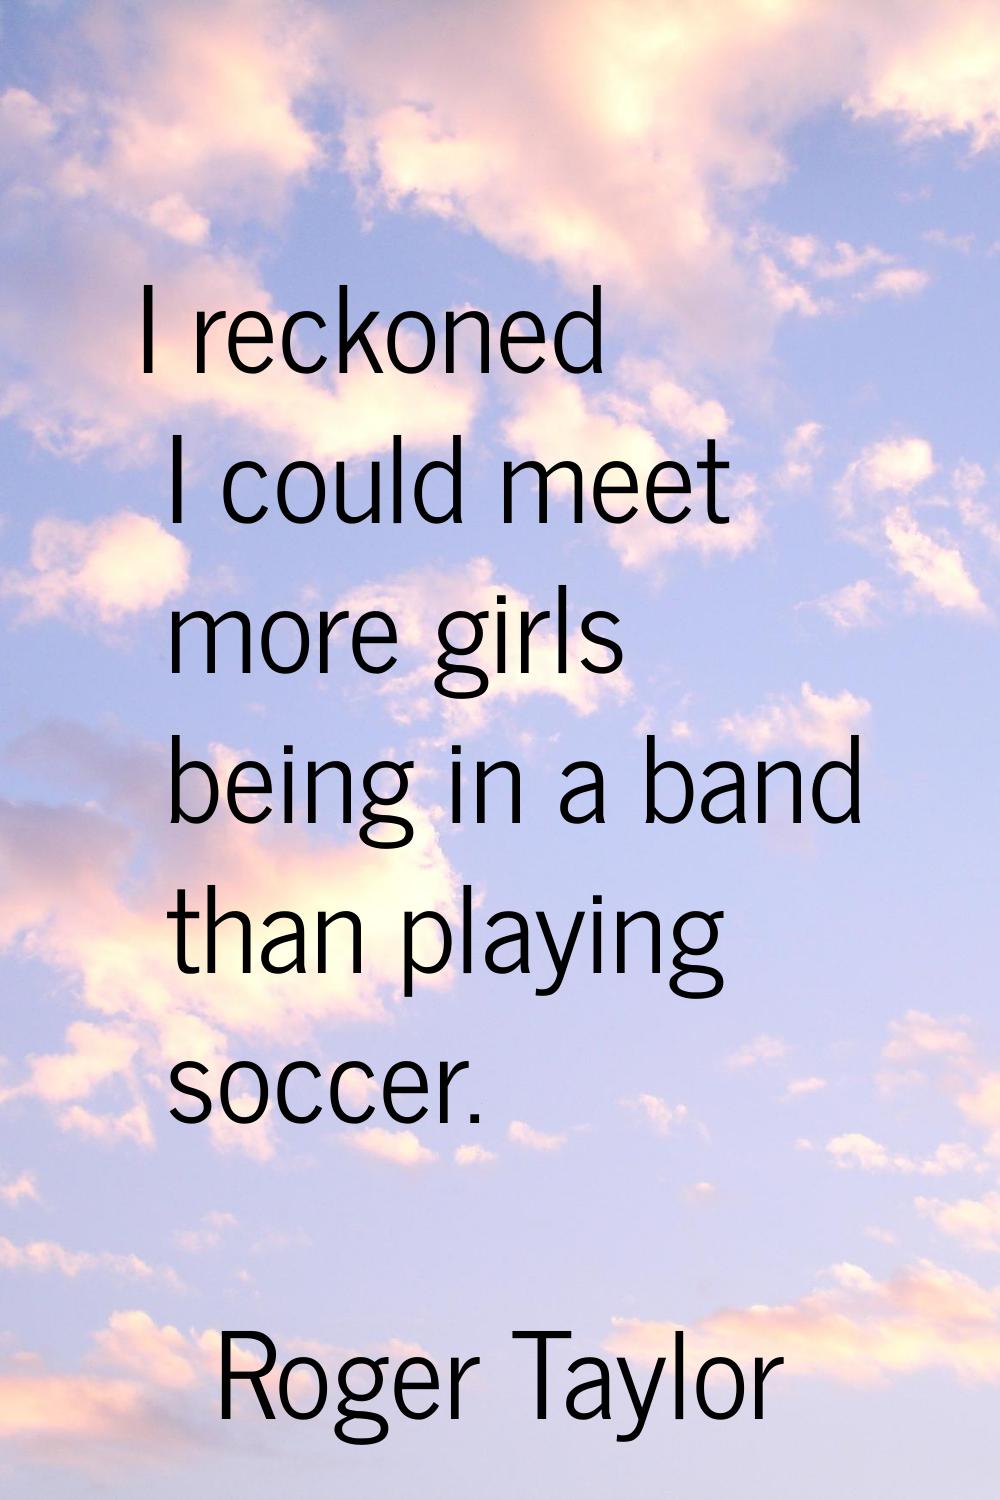 I reckoned I could meet more girls being in a band than playing soccer.